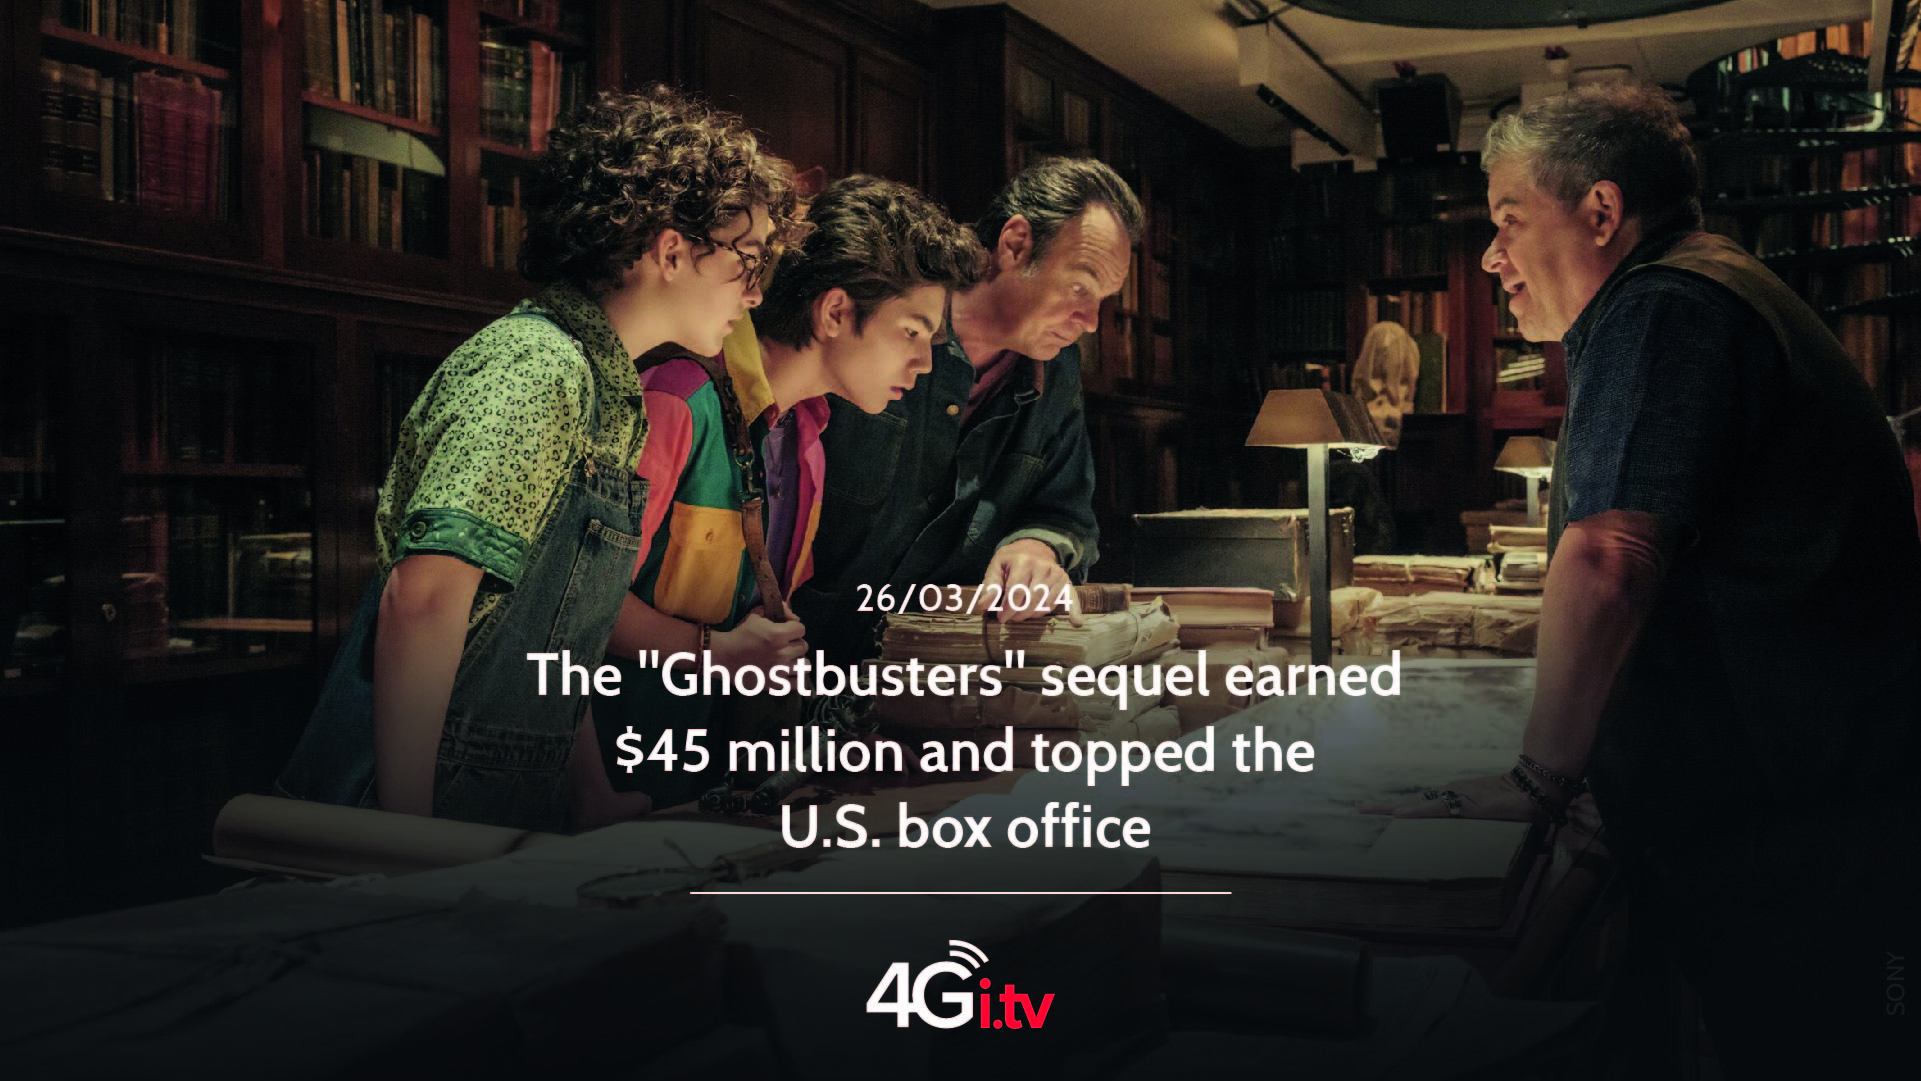 Lesen Sie mehr über den Artikel The “Ghostbusters” sequel earned $45 million and topped the U.S. box office 